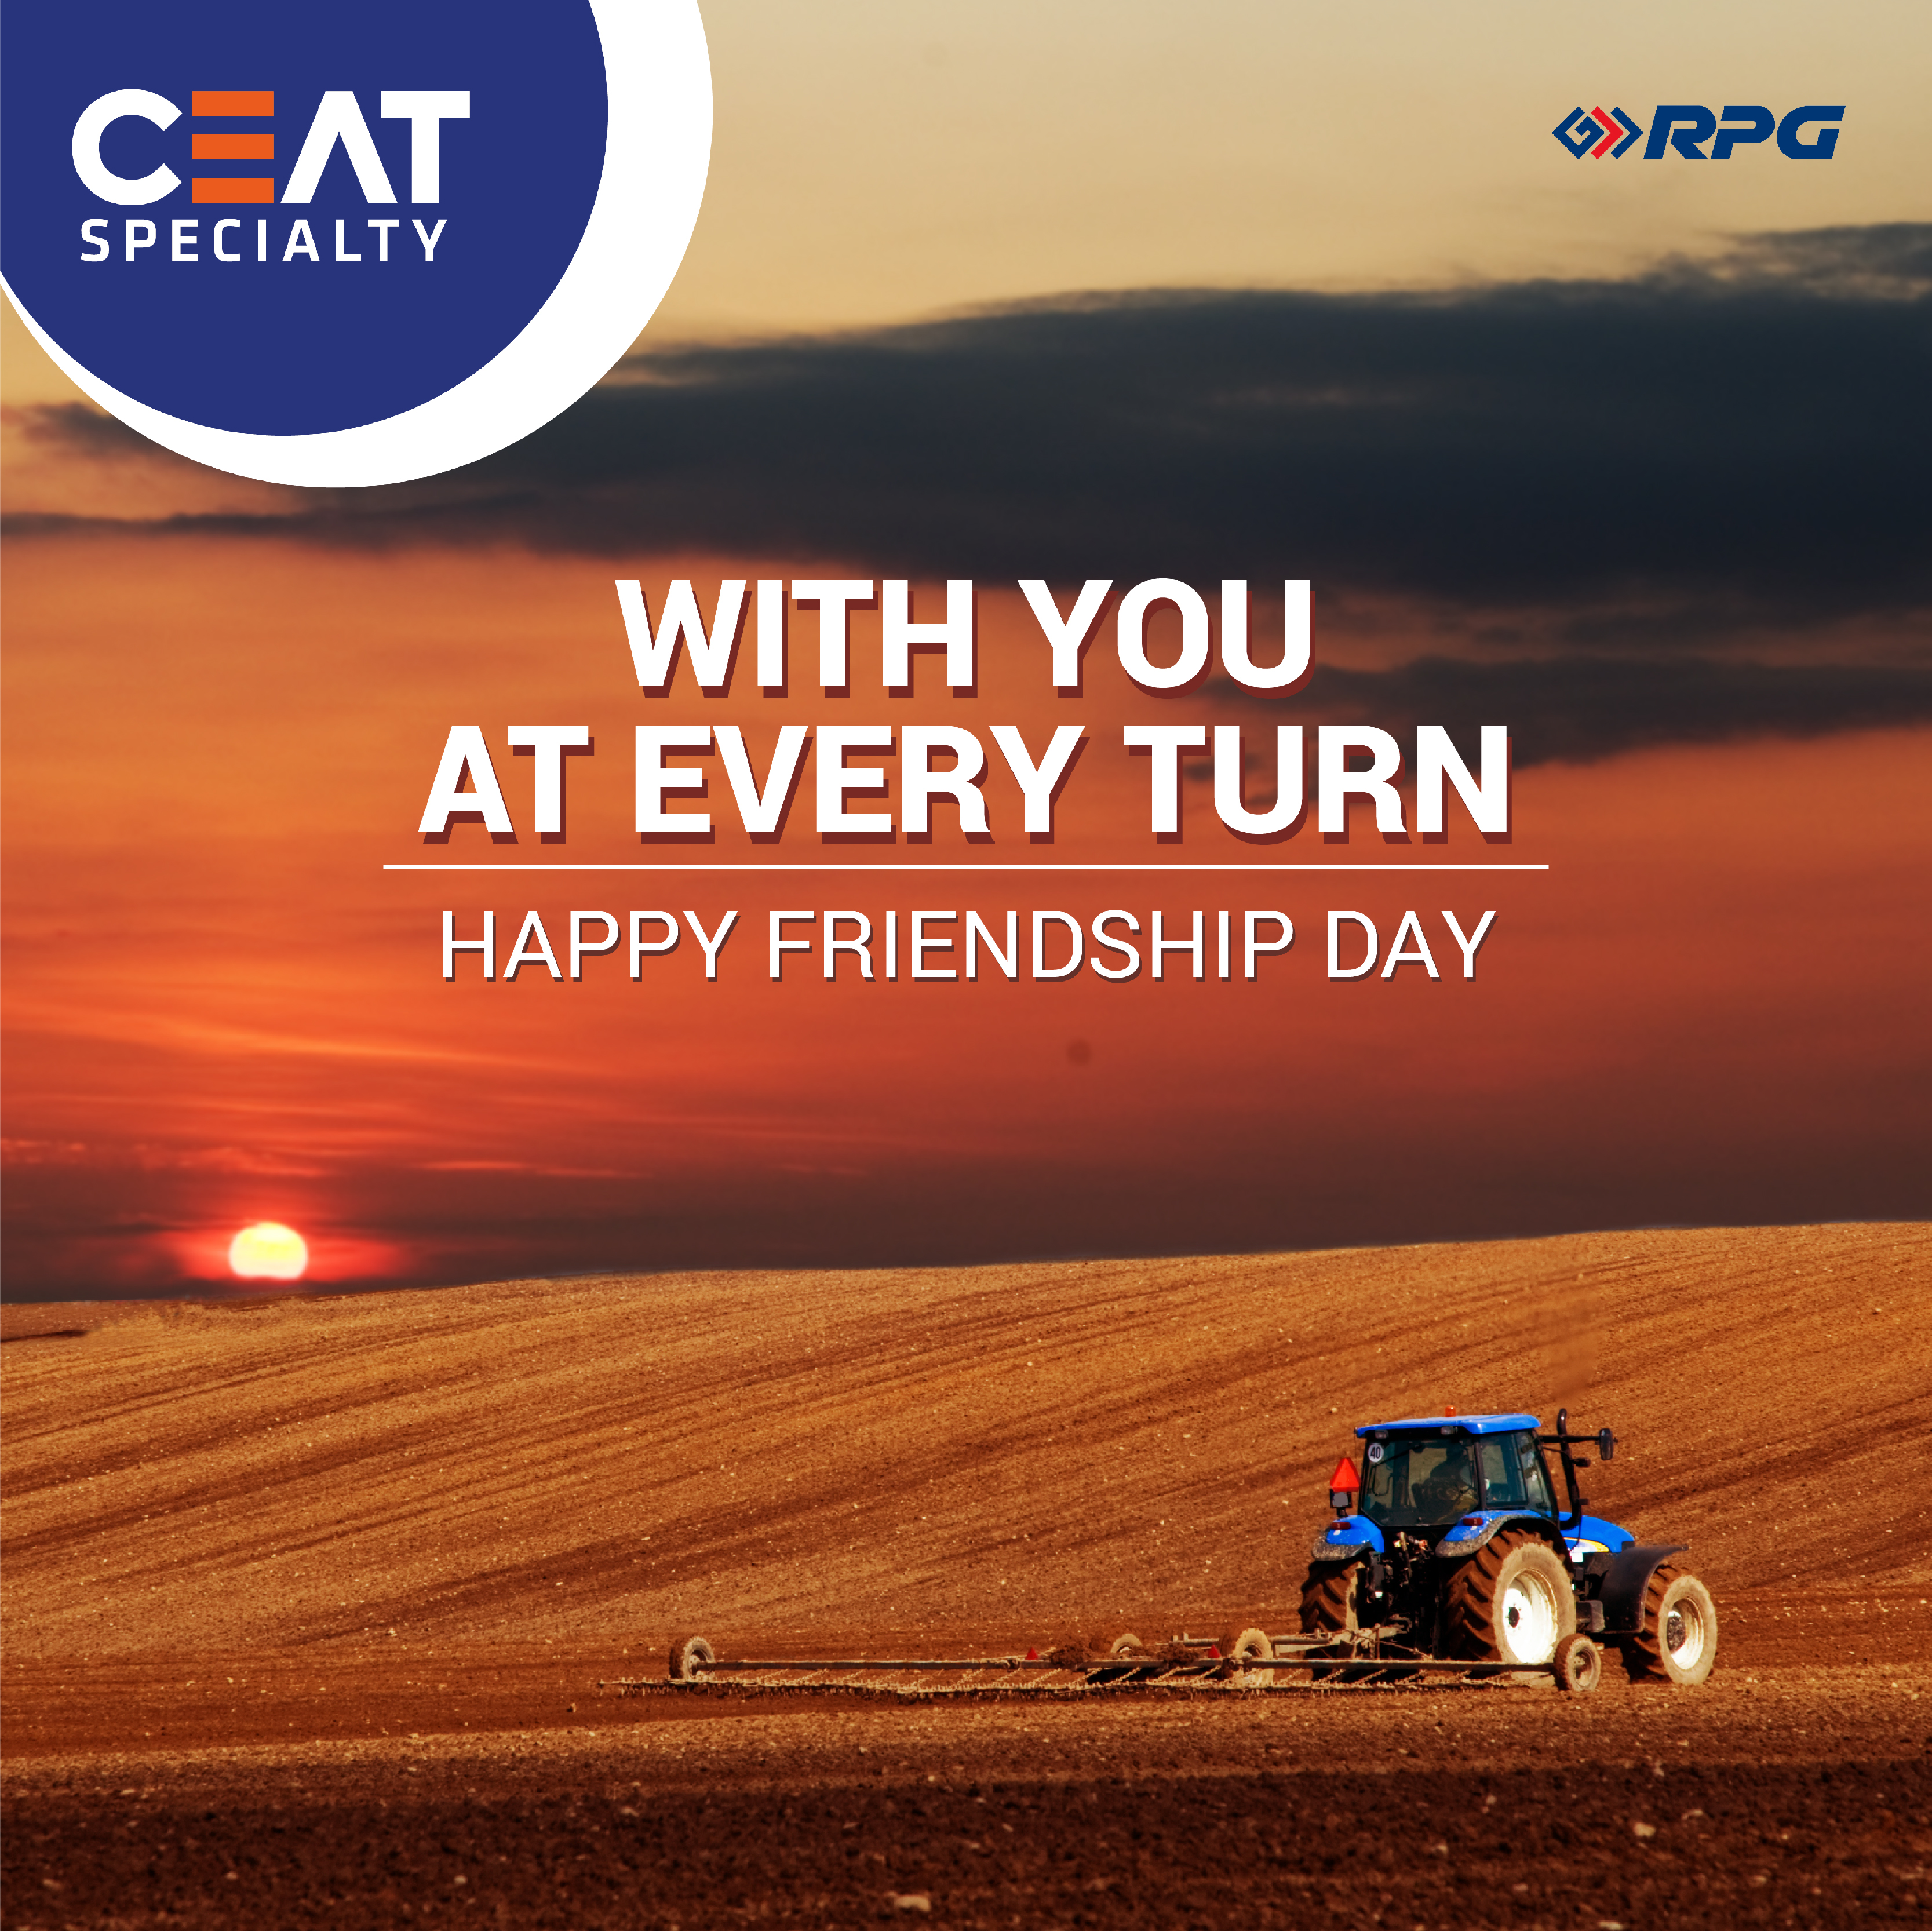 Happy Friendship Day post design idea by CEAT